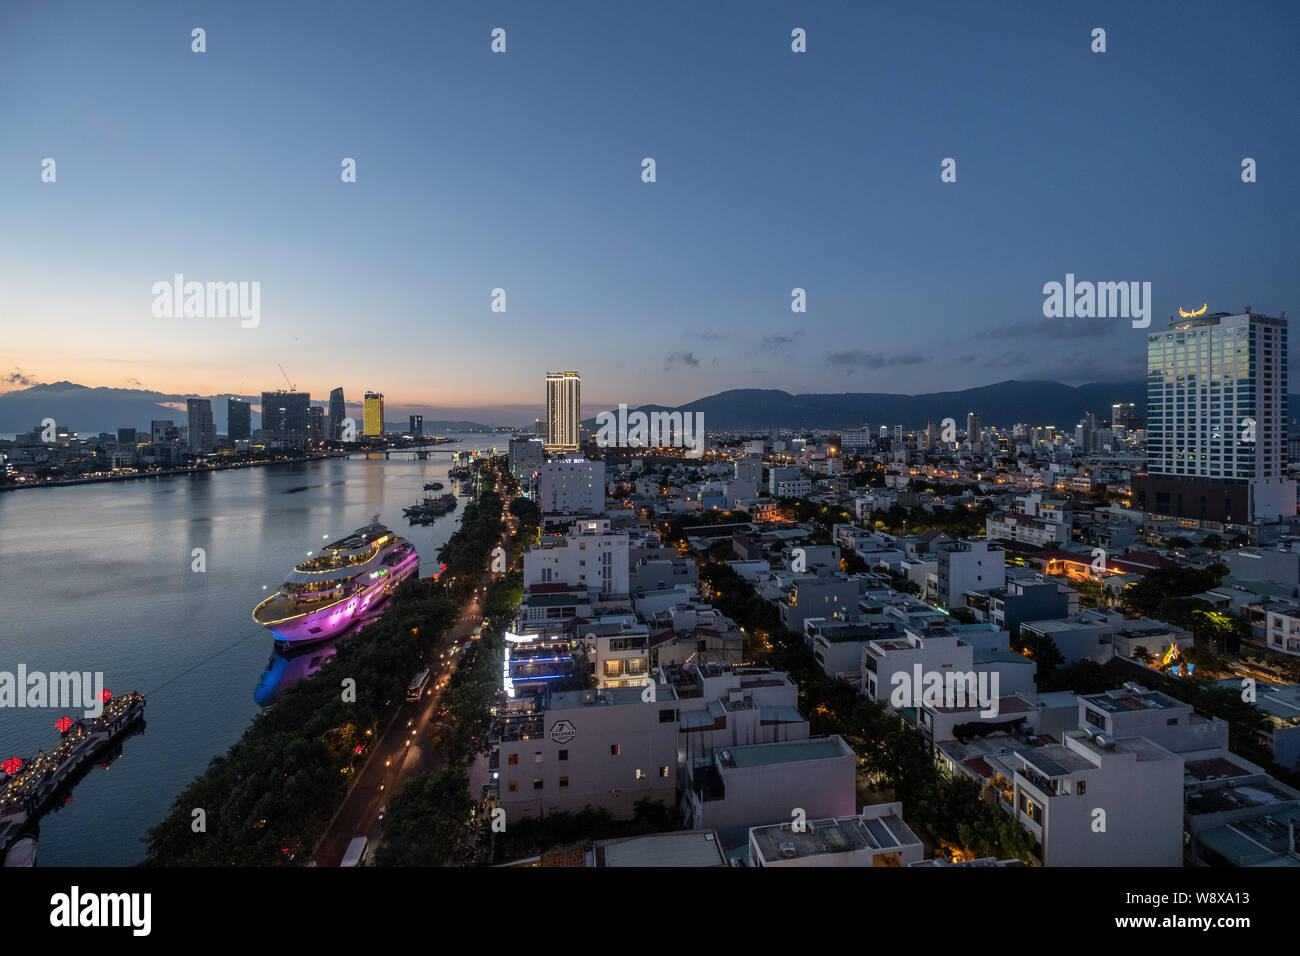 Overview of Danang city by night, central Vietnam Stock Photo